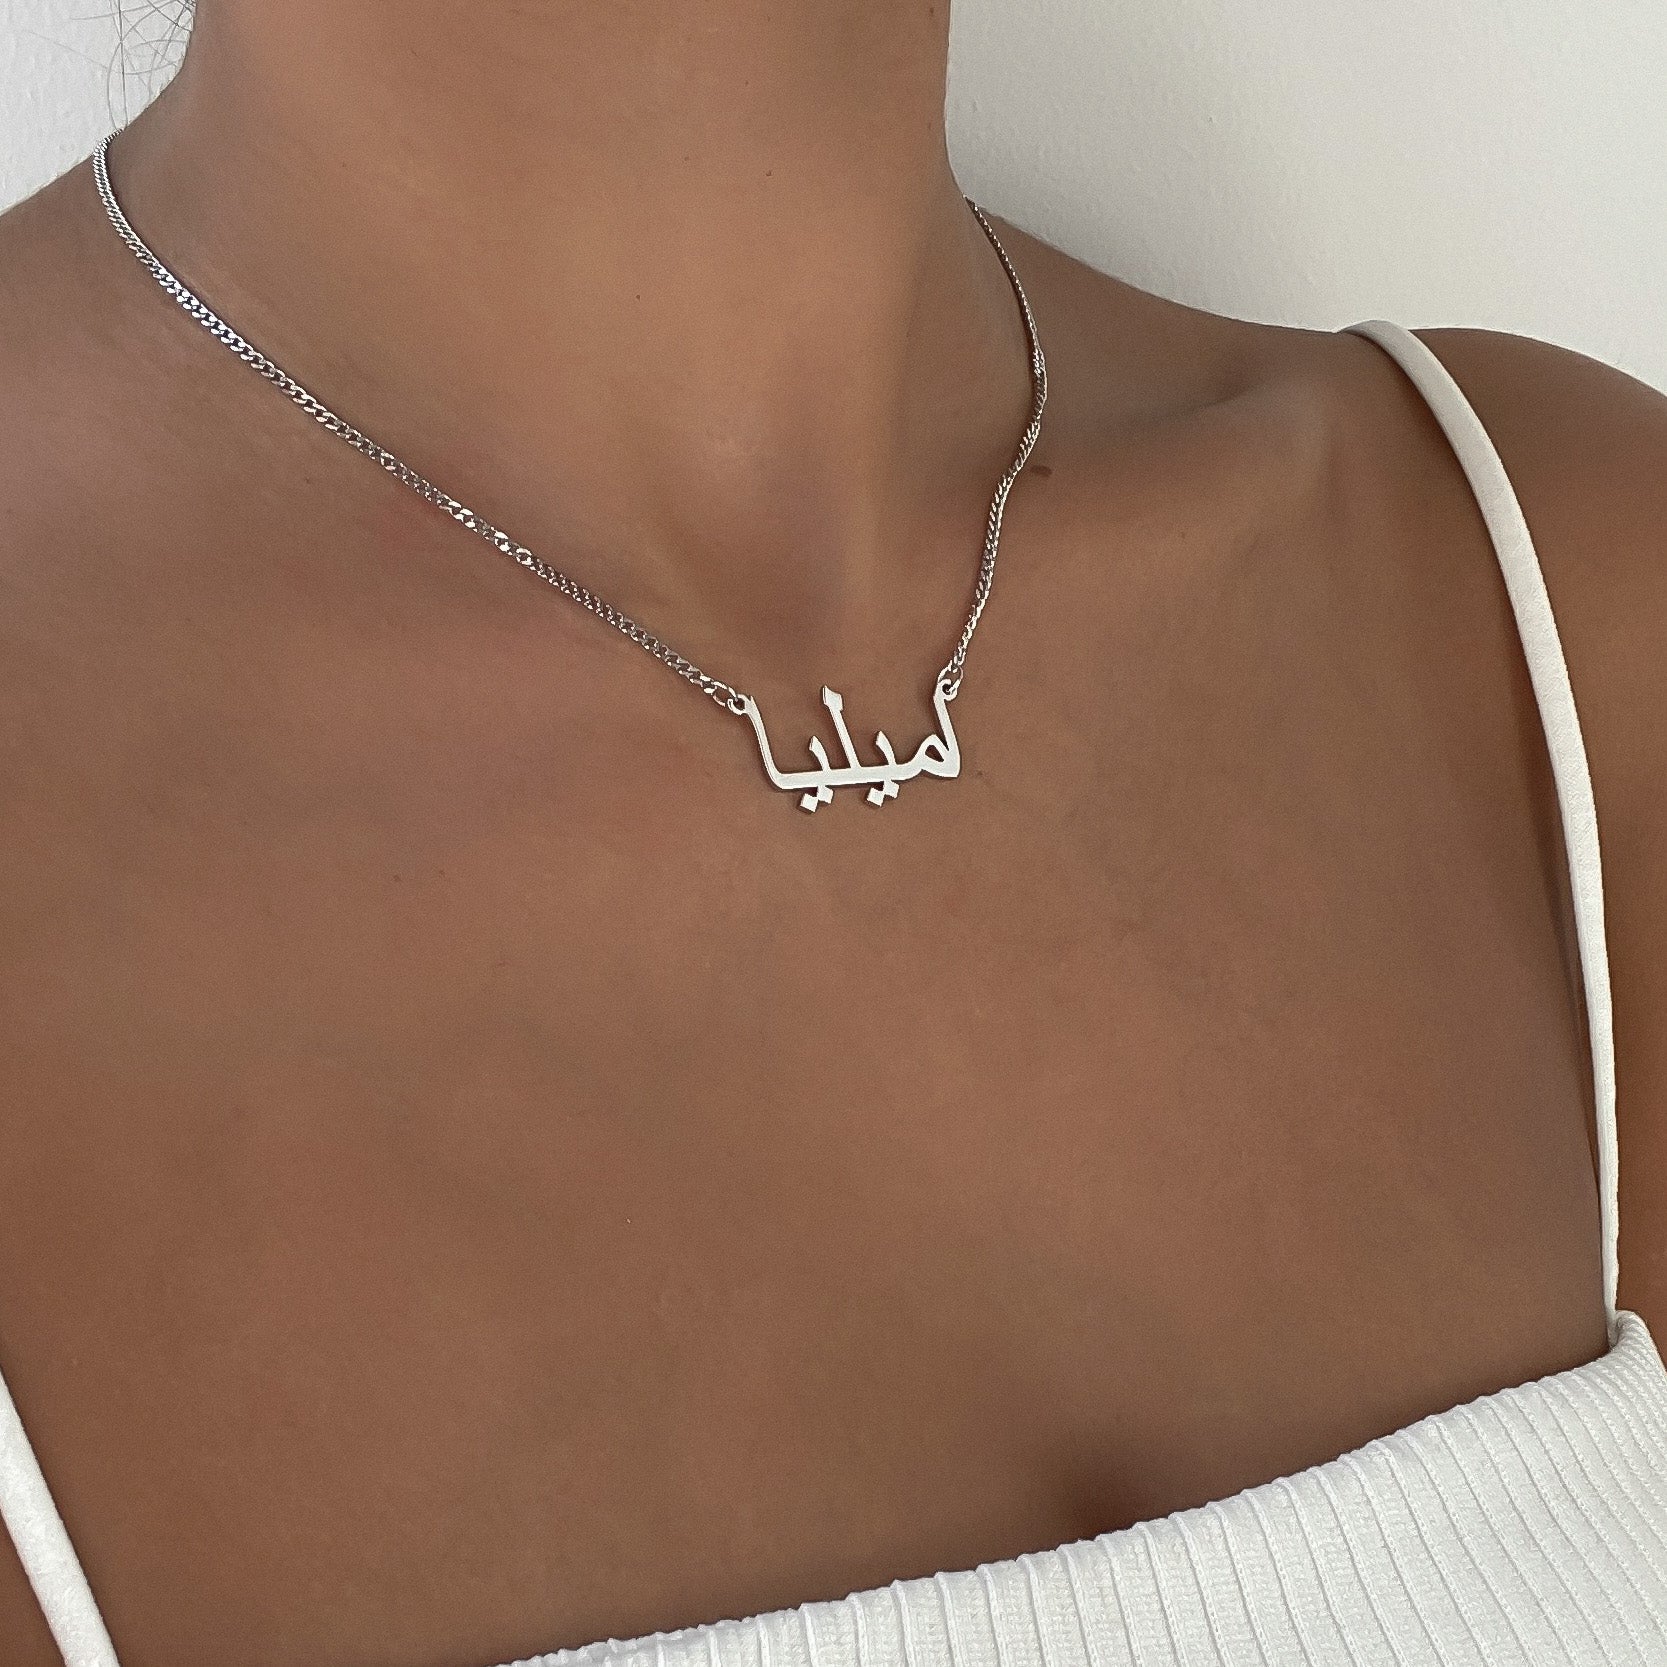 Woman wearing My arabic name necklace in silver